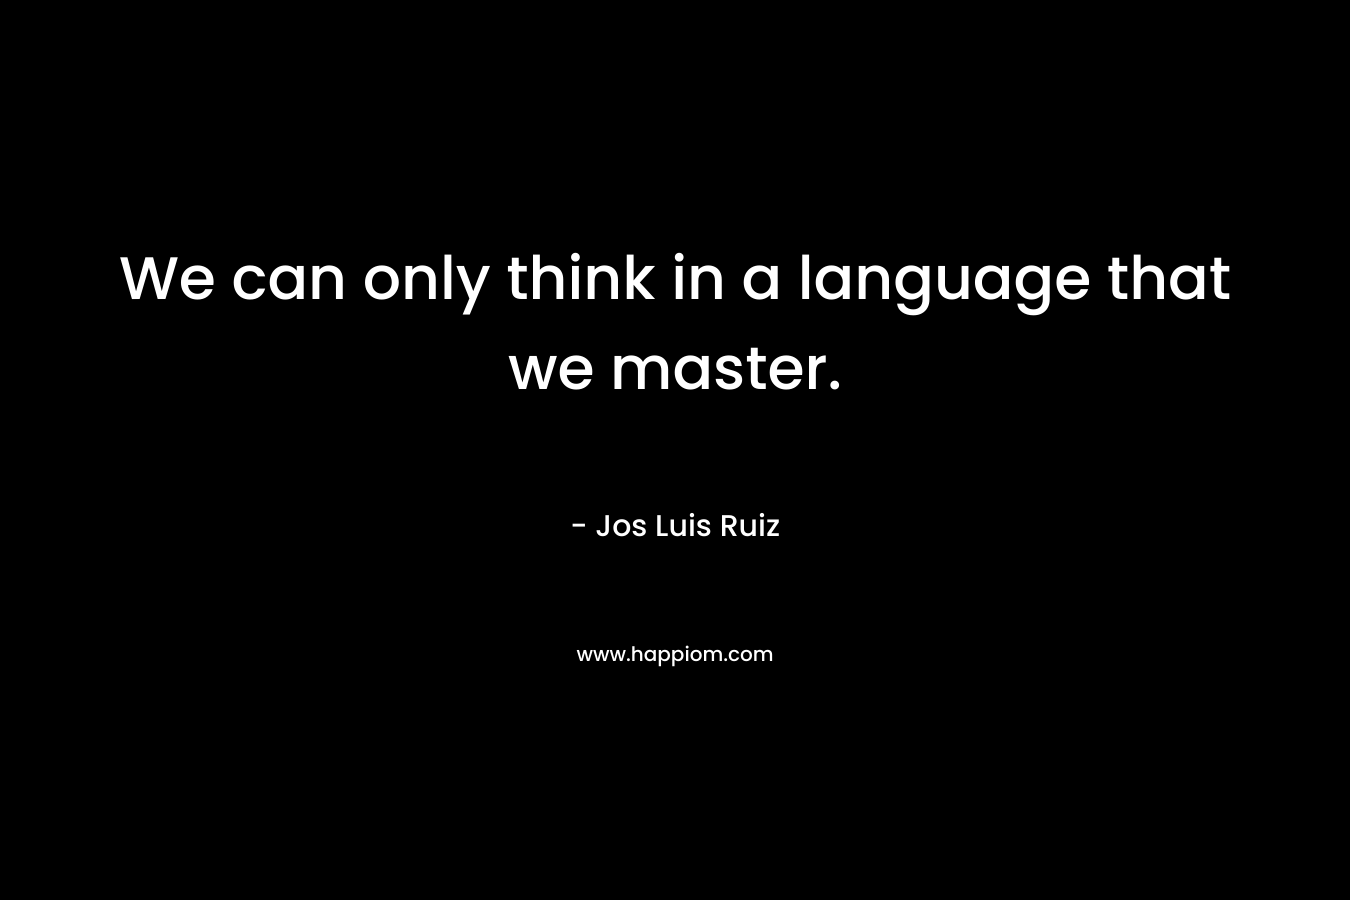 We can only think in a language that we master.